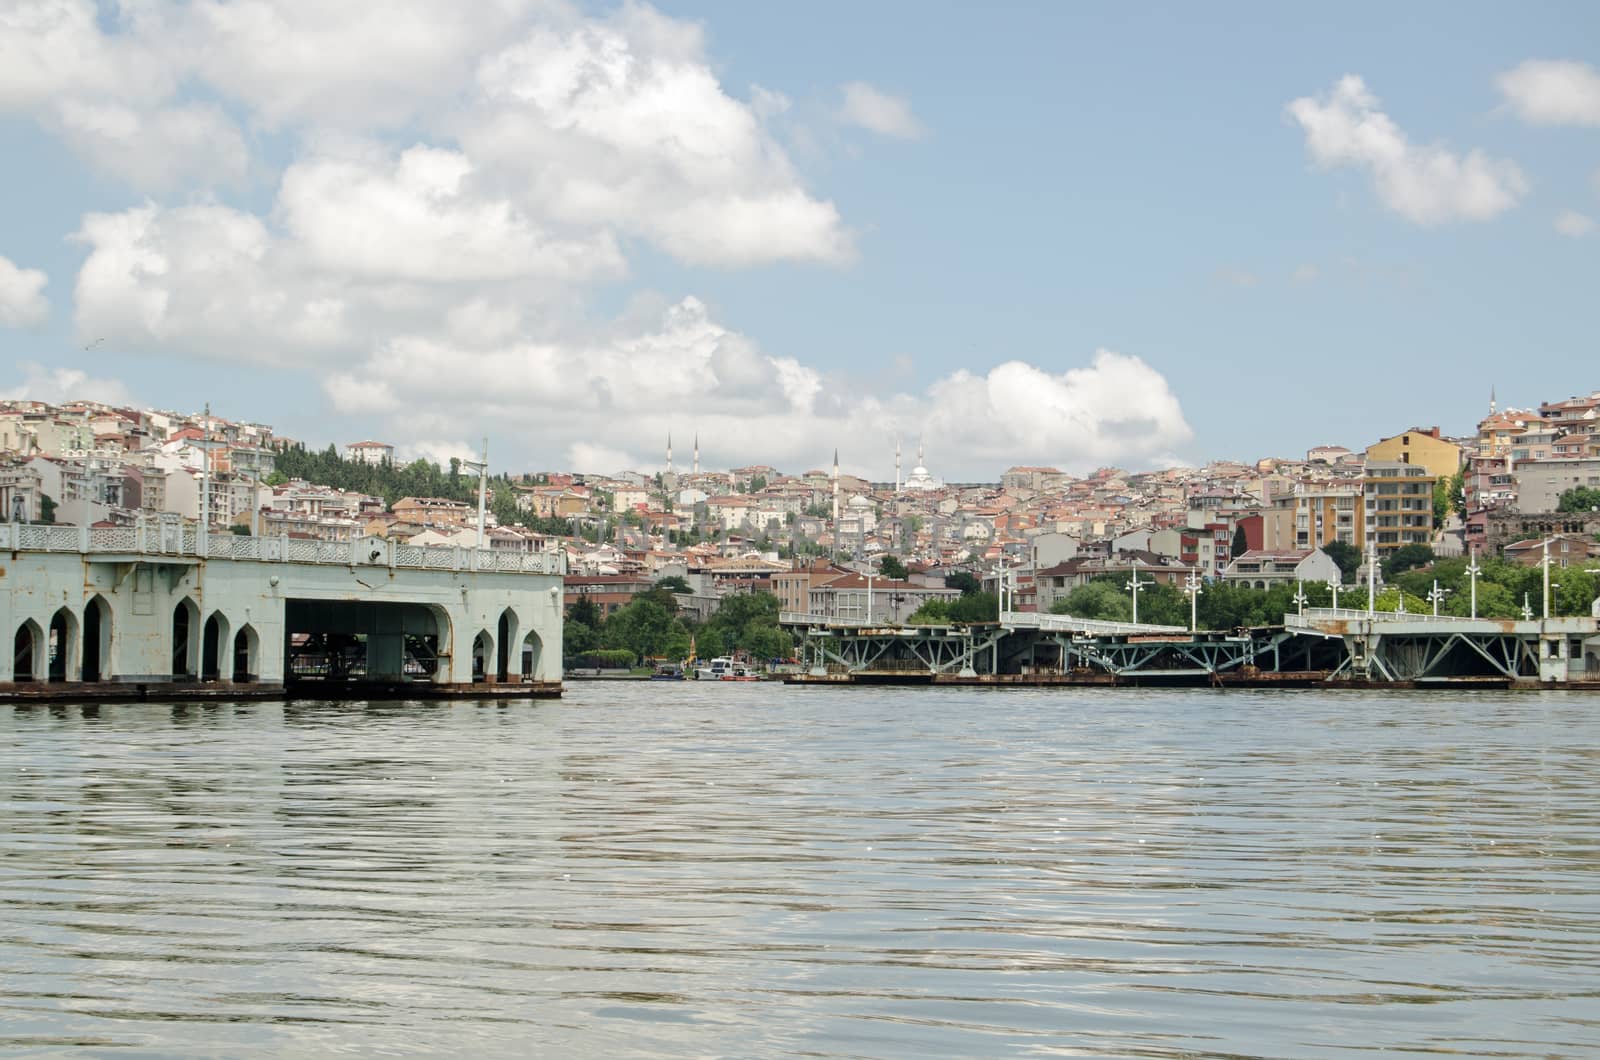 View of the bridge over the Golden Horn in Istanbul which has been dismantled as it was too low for some ships to pass under.  Looking from the southern shore towards the Beyoglu district of the city.